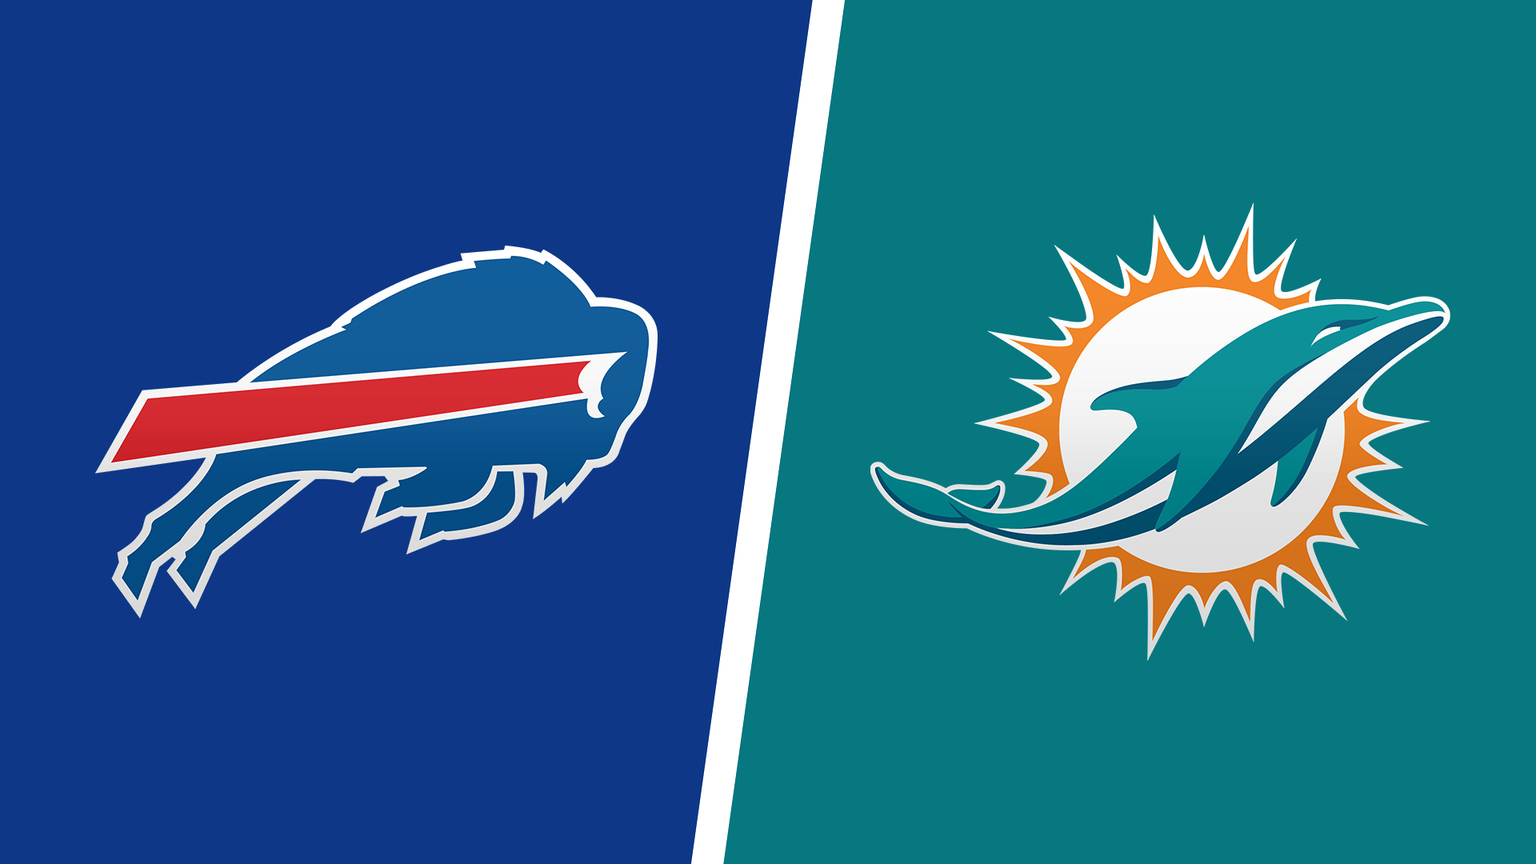 Bills take on Dolphins Sunday, looking to improve to 3-0 (preview, media & info)